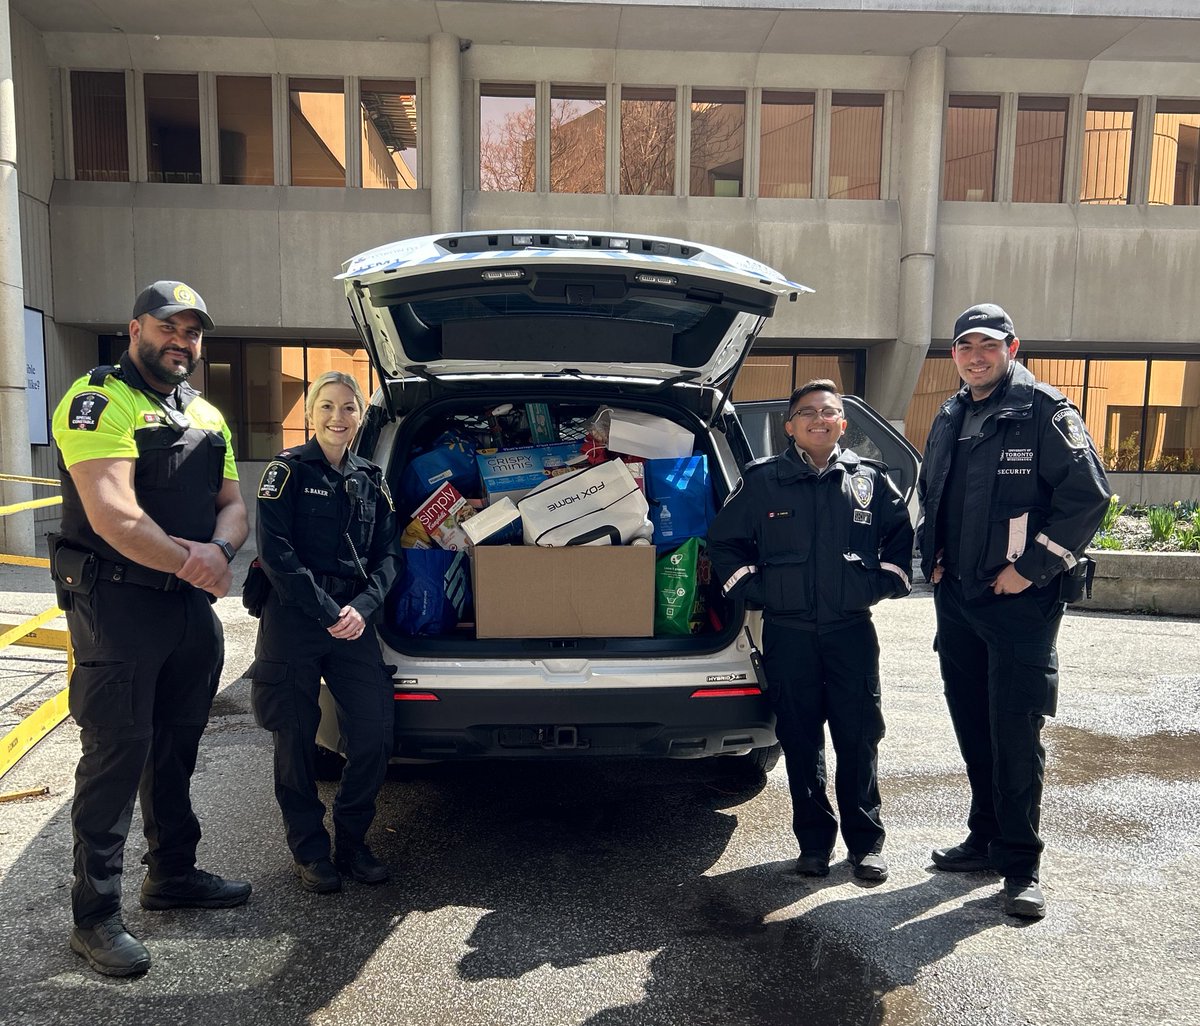 Our community did an excellent job at #crammingthecruiser! A big thank you to everyone who generously donated. Because of your donations, we are helping ensure families in our community are fed. @UTMResidence @EdenFood4Change